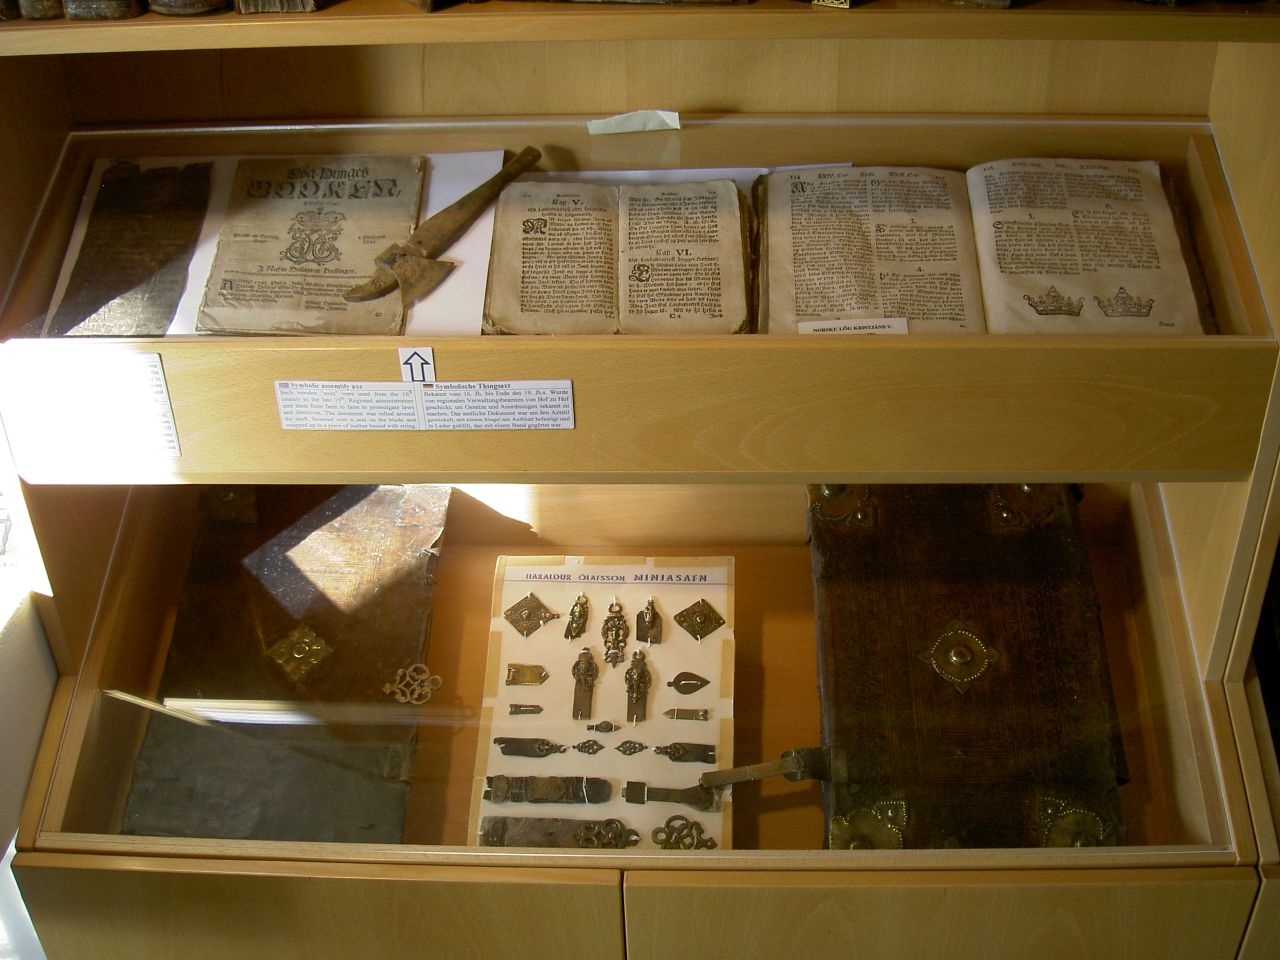 an open book on display in a wooden case